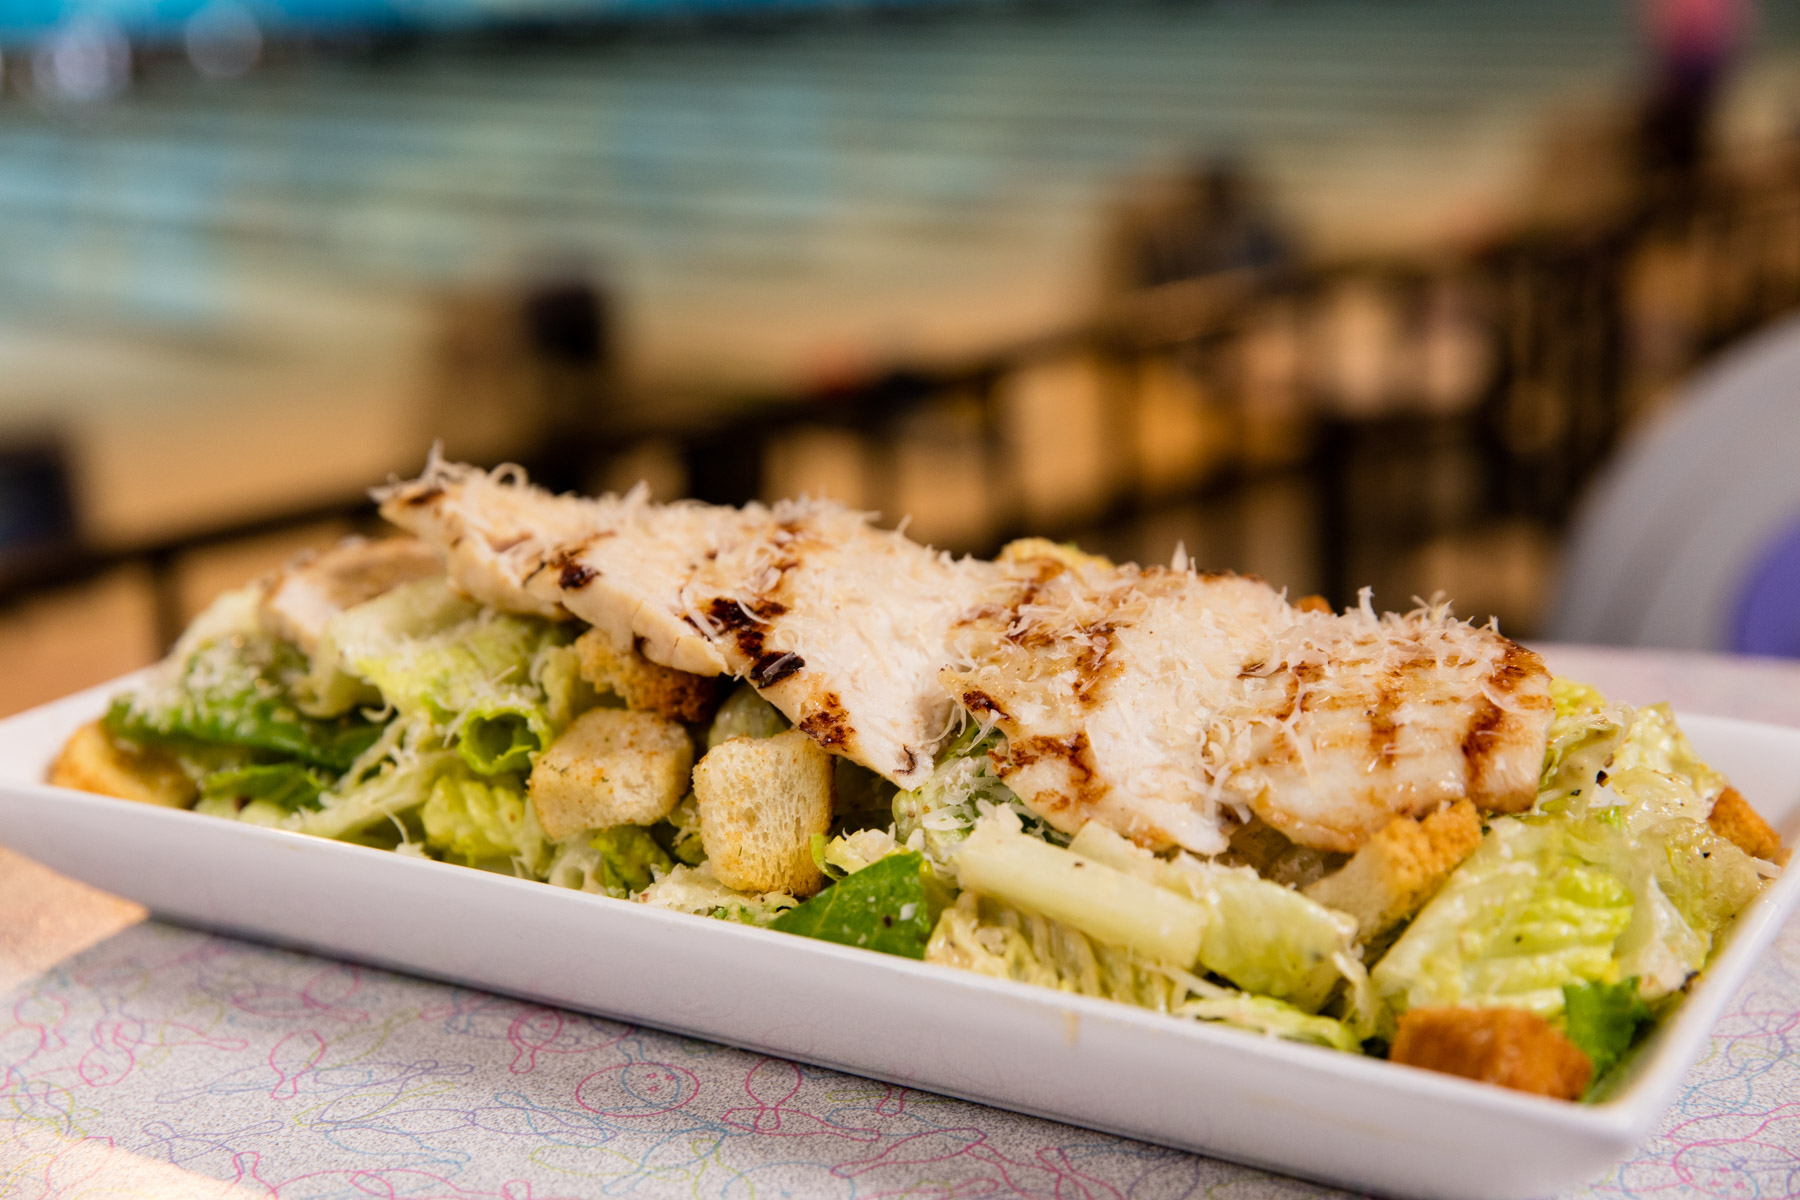 Grilled chicken caesar salad with croutons from Rab's kitchen